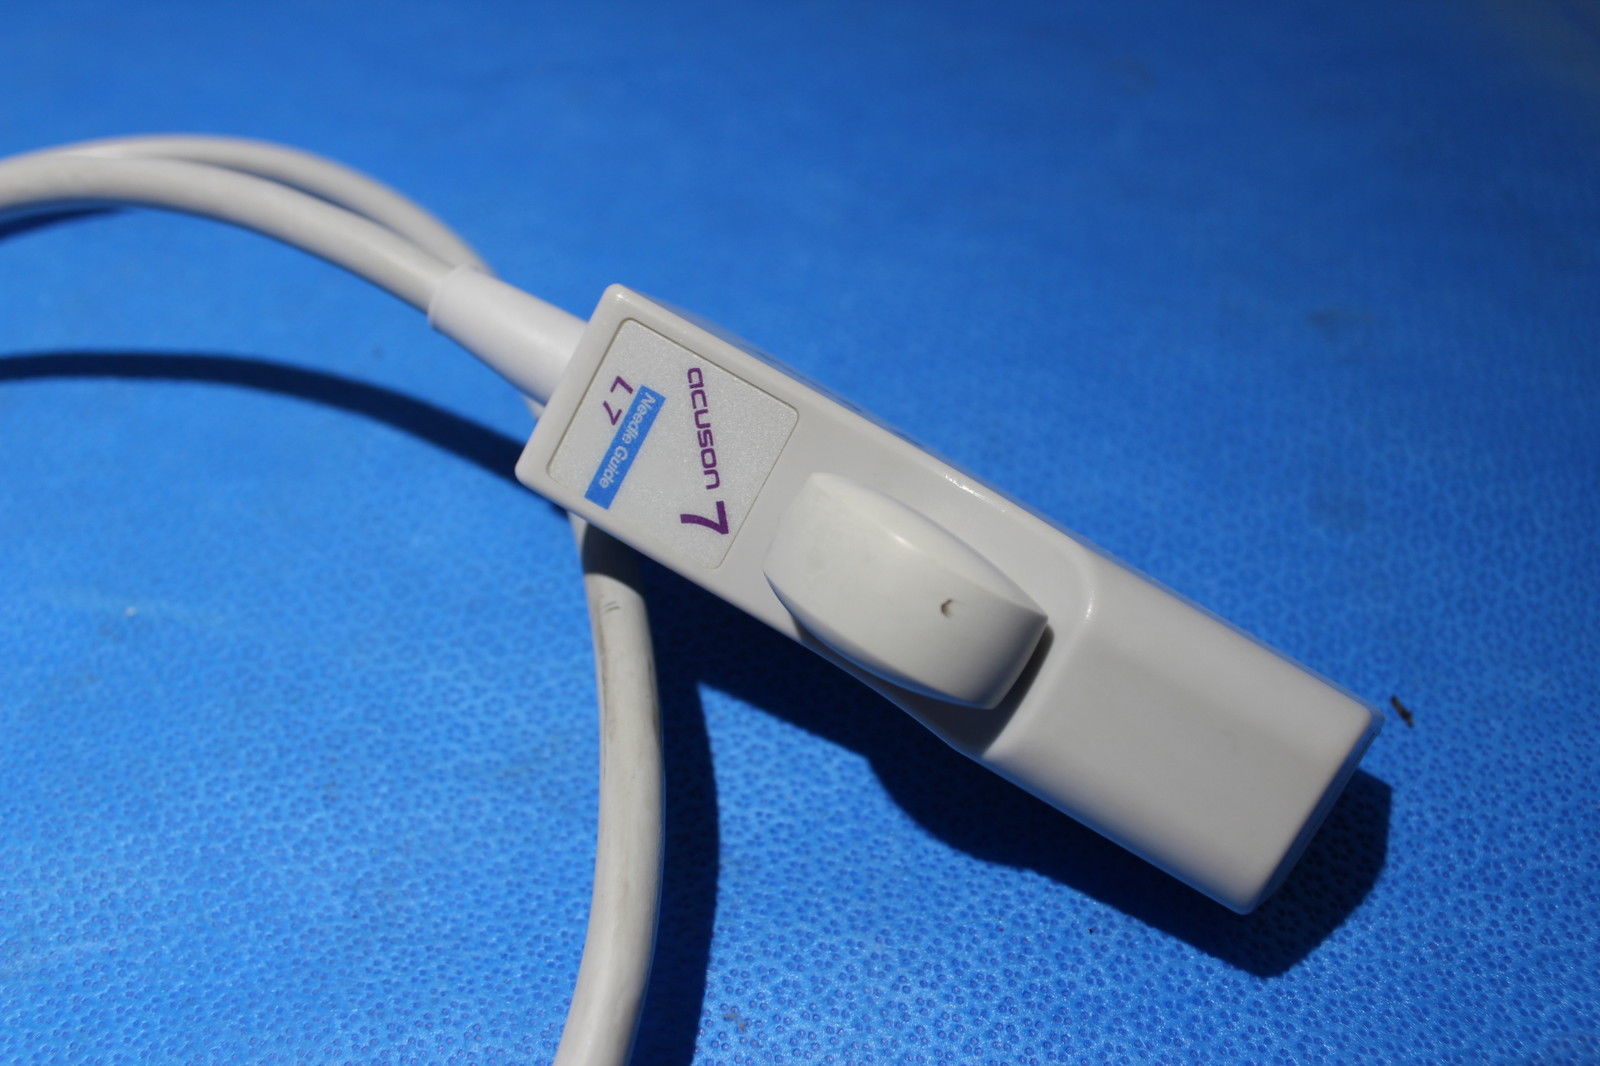 Acuson L7 Needle Guide Ultrasound Linear Array Transducer Probe for XP/Aspen #2 DIAGNOSTIC ULTRASOUND MACHINES FOR SALE